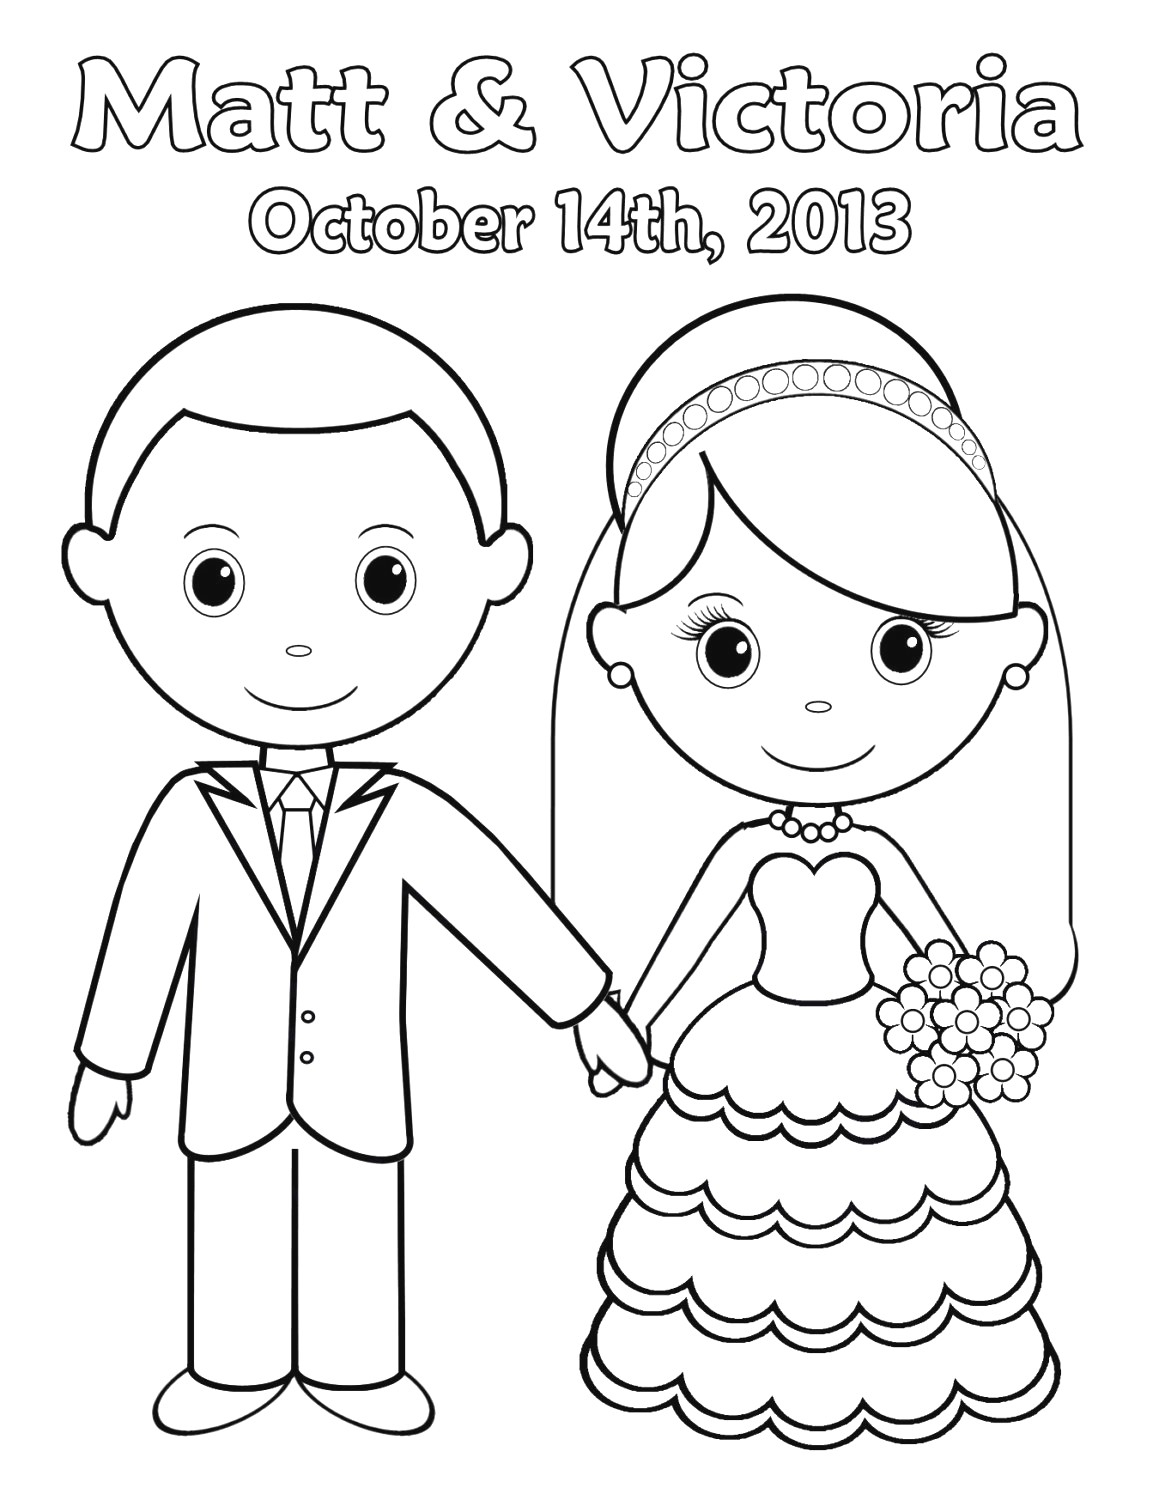 Personalized Coloring Pages Page 39 Ageanddignity Free Coloring Pages For Kids